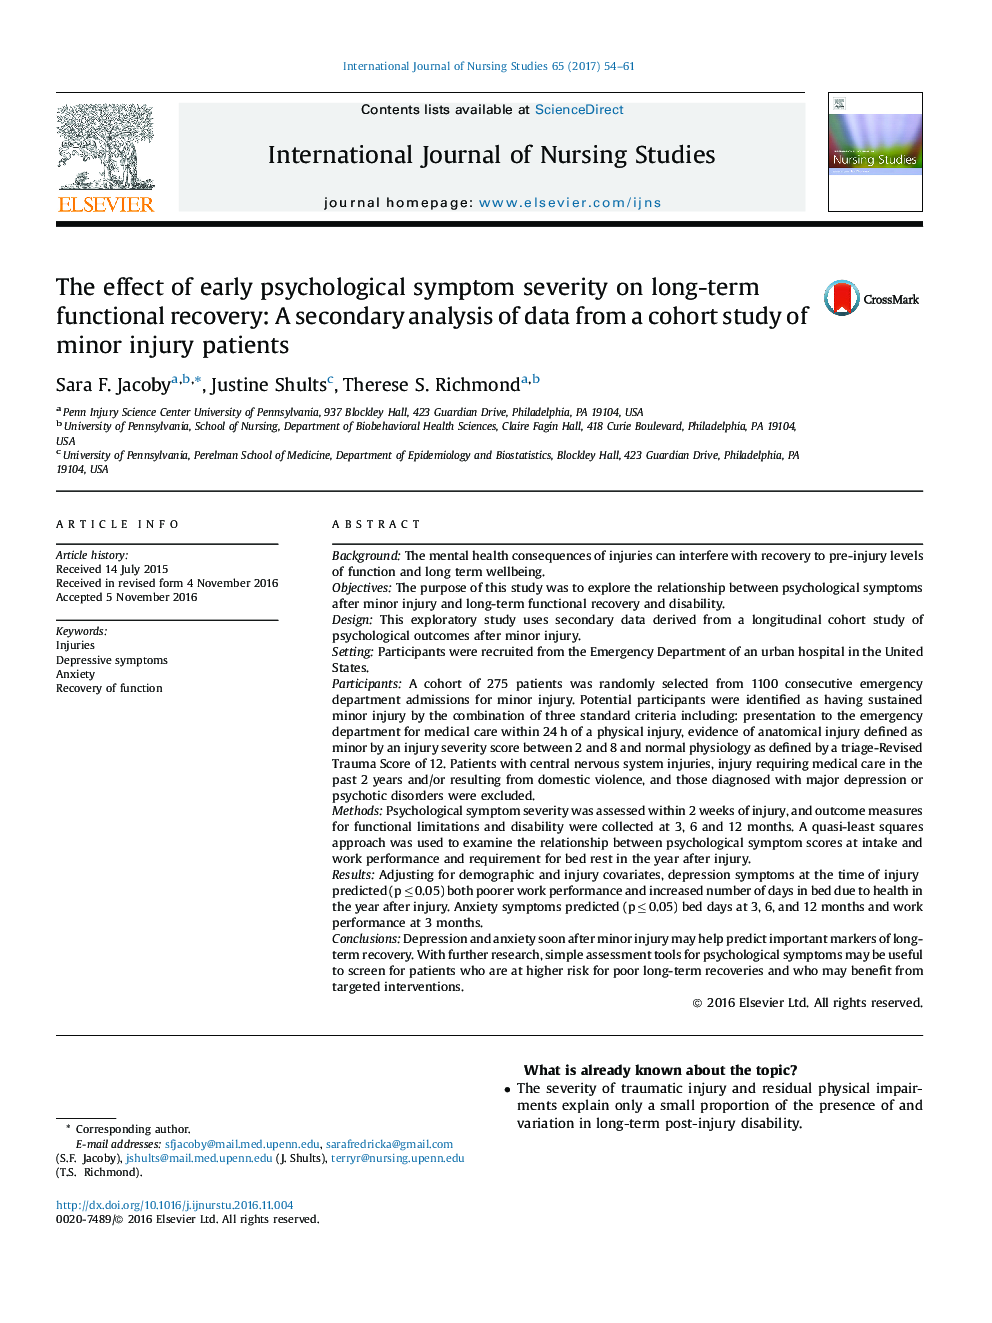 The effect of early psychological symptom severity on long-term functional recovery: A secondary analysis of data from a cohort study of minor injury patients